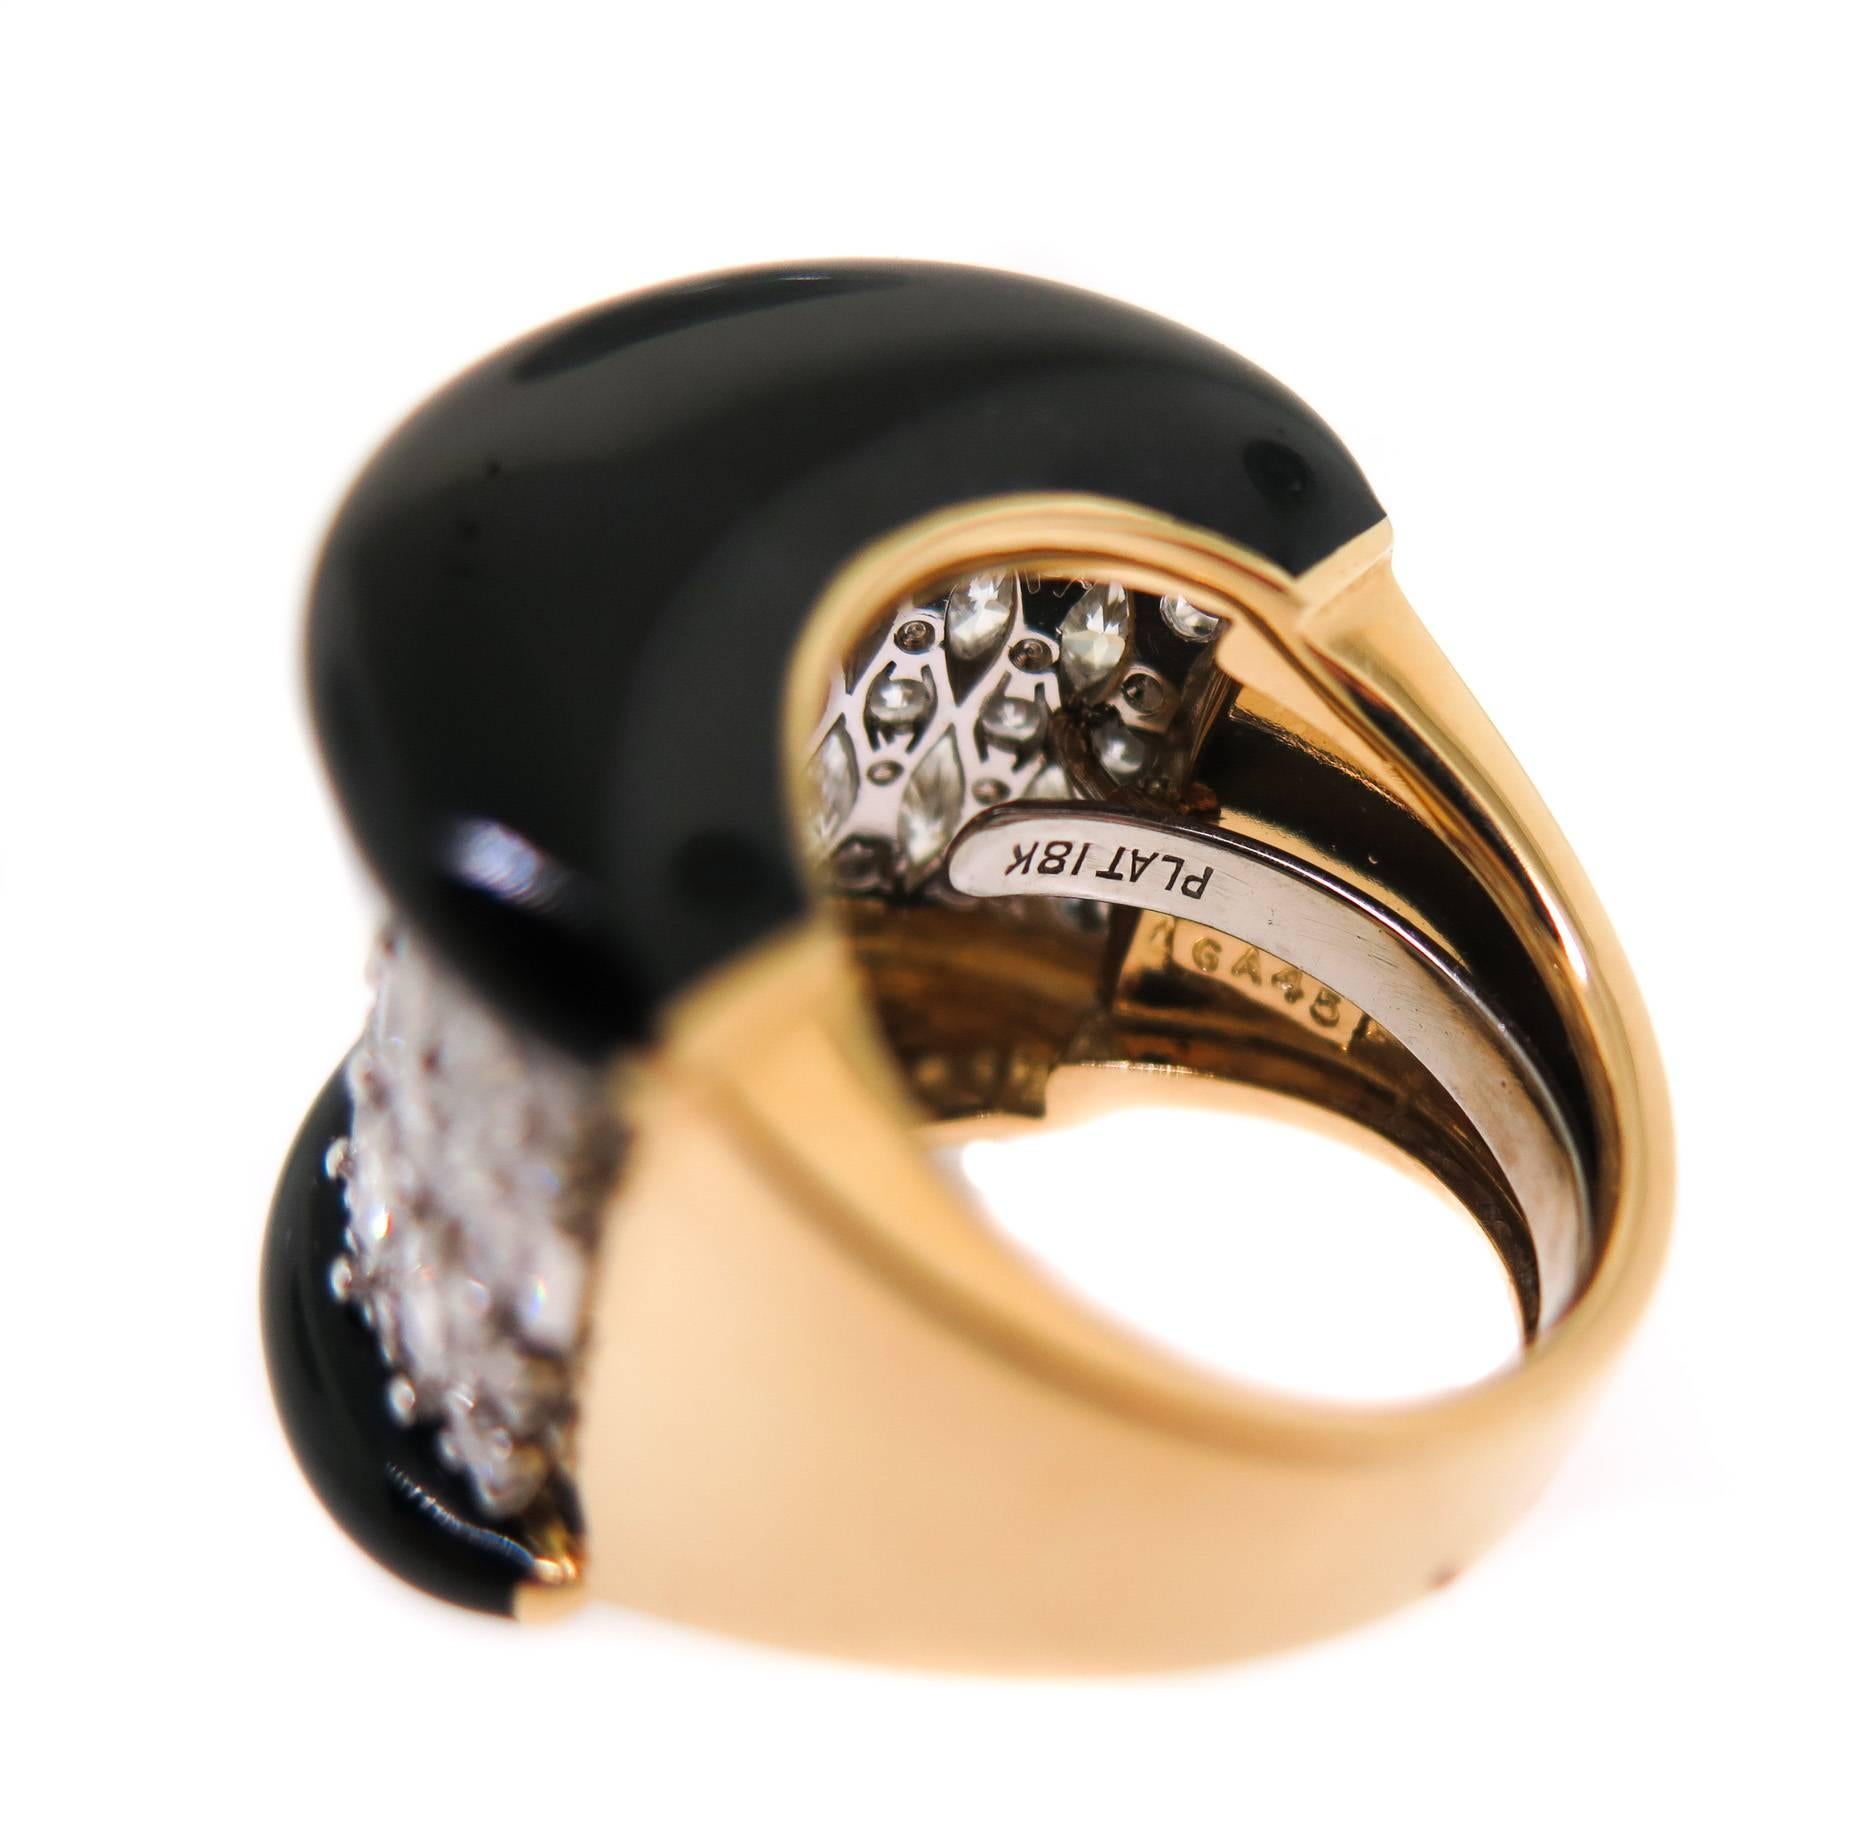 Big, bold and beautiful, this striking David Webb ring is crafted in 18k yellow gold and platinum featuring 4.19 carats of Marquise cut diamond and 1.43 carats of round brilliant cut diamonds, beautifully design and accented with black enamel sides.